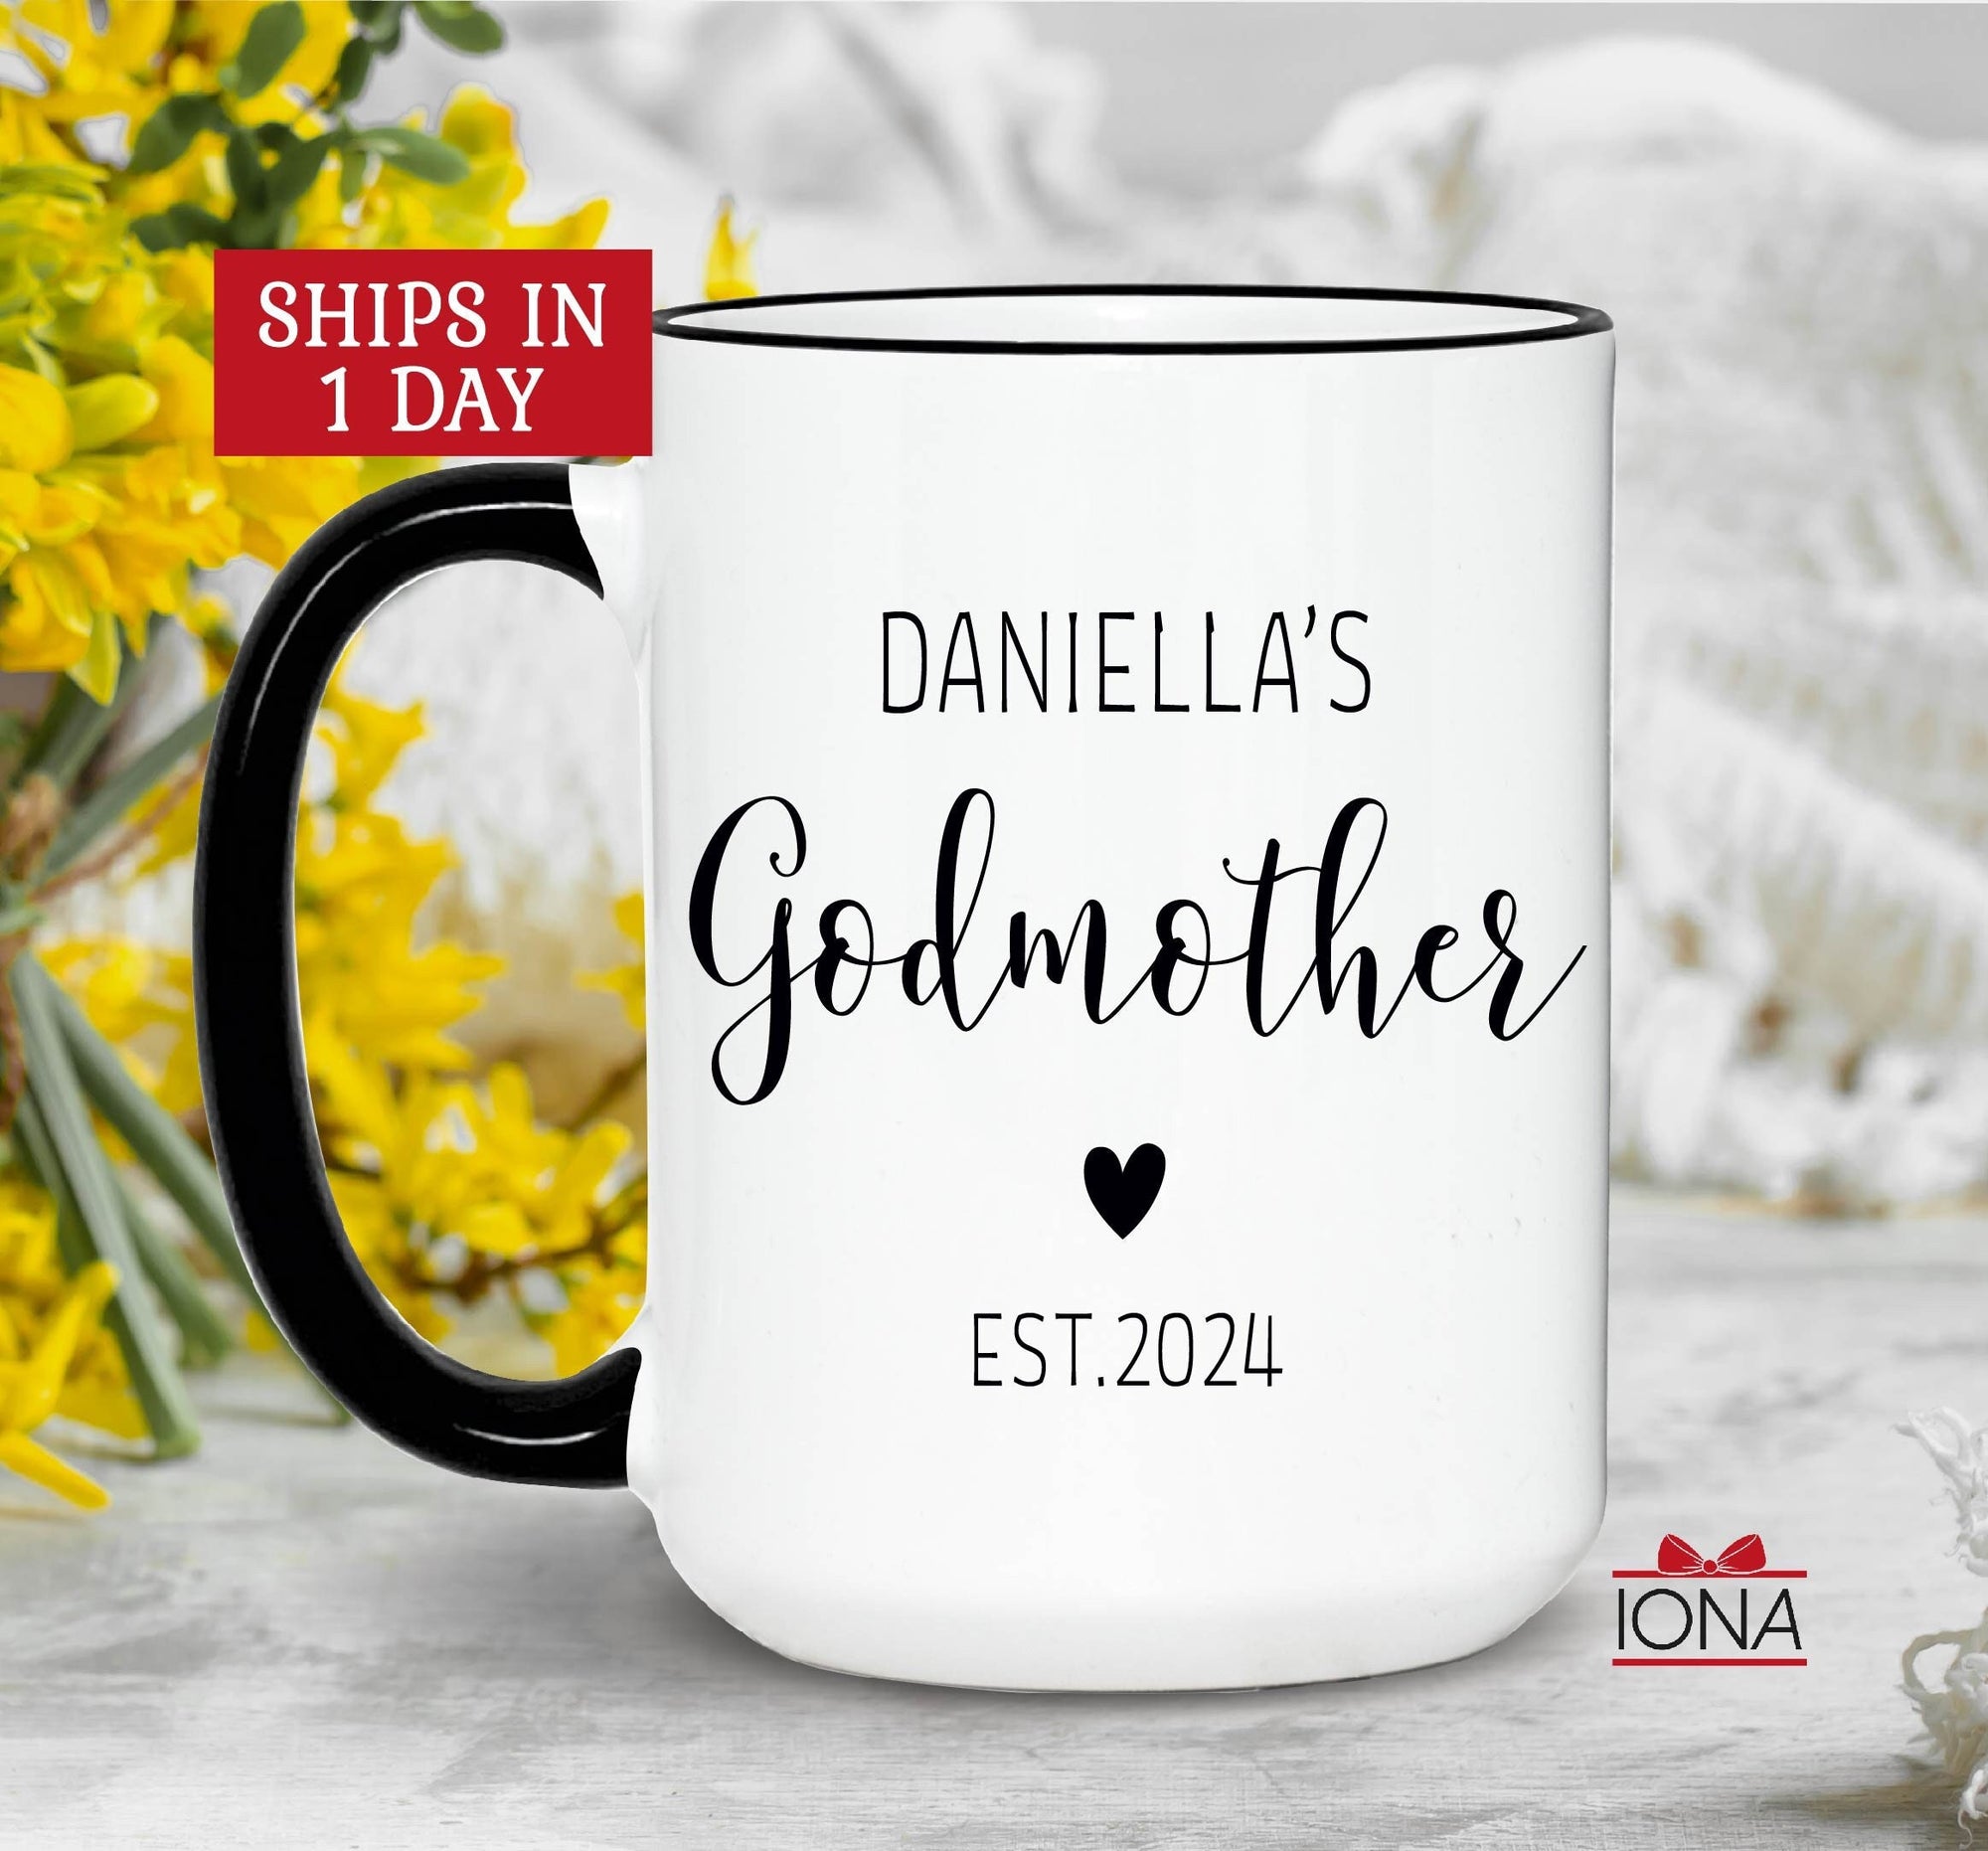 Personalized Godmother Coffee Mug, Custom Christening Cup, Unique Baptism Proposal, Special Role, Baby Name Present, Baby Godparent Keepsake